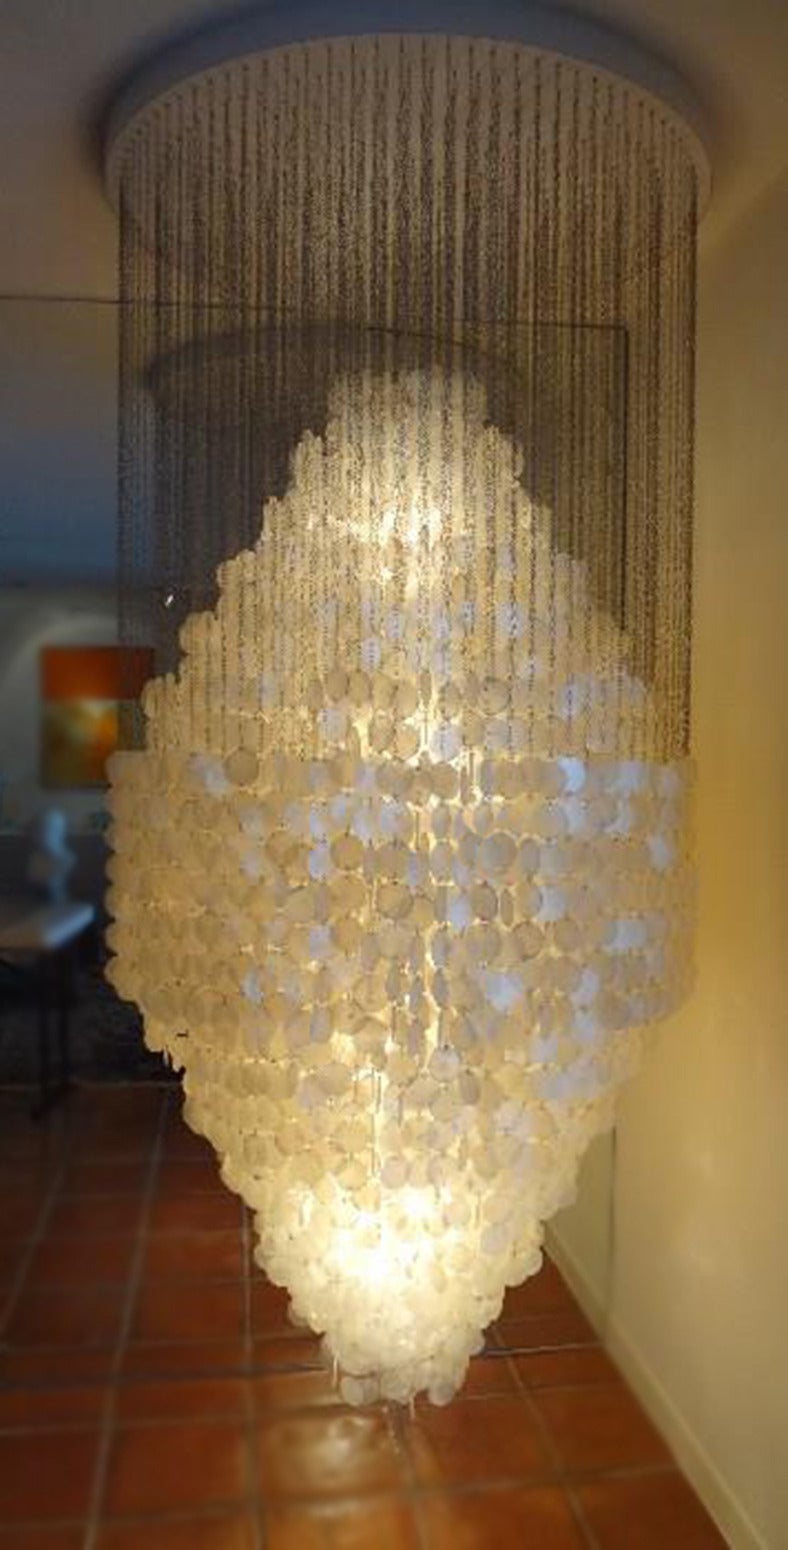 Massive Verner Panton 8DM fun chandelier. This is not a current production piece or a reissue this is a very rare original Verner Panton designed chandelier for J. Luber of Switzerland. This piece was acquired from the original owner who had